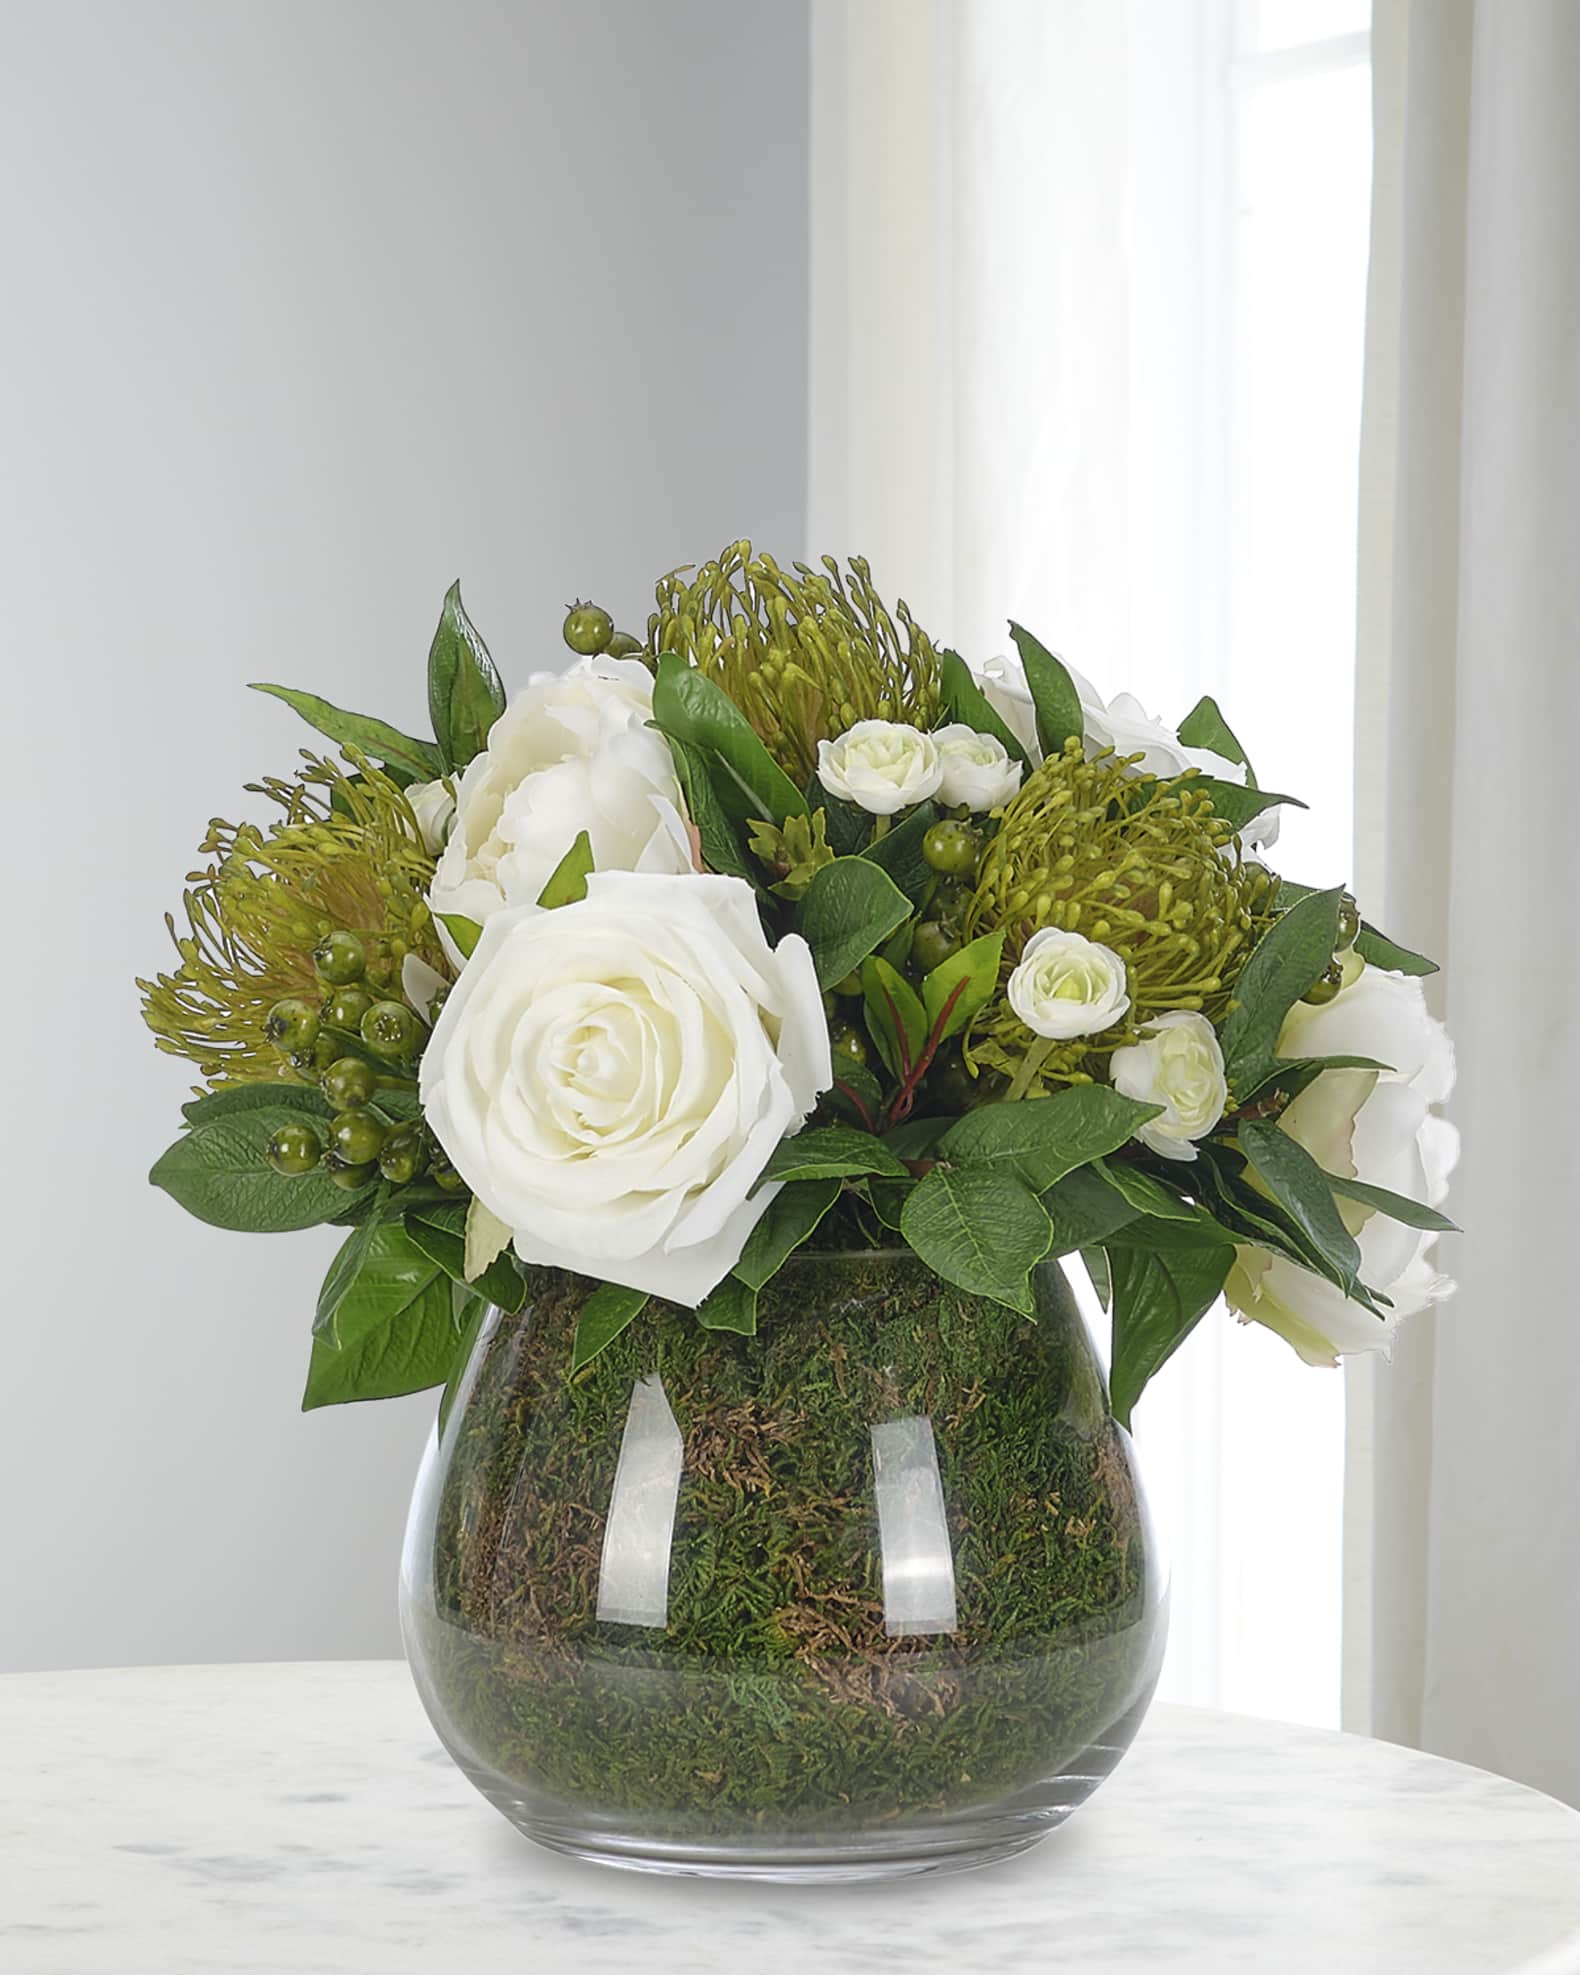 NDI Roses and Proteas 11 Faux Floral Arrangement in Moss Garden Glass Vase